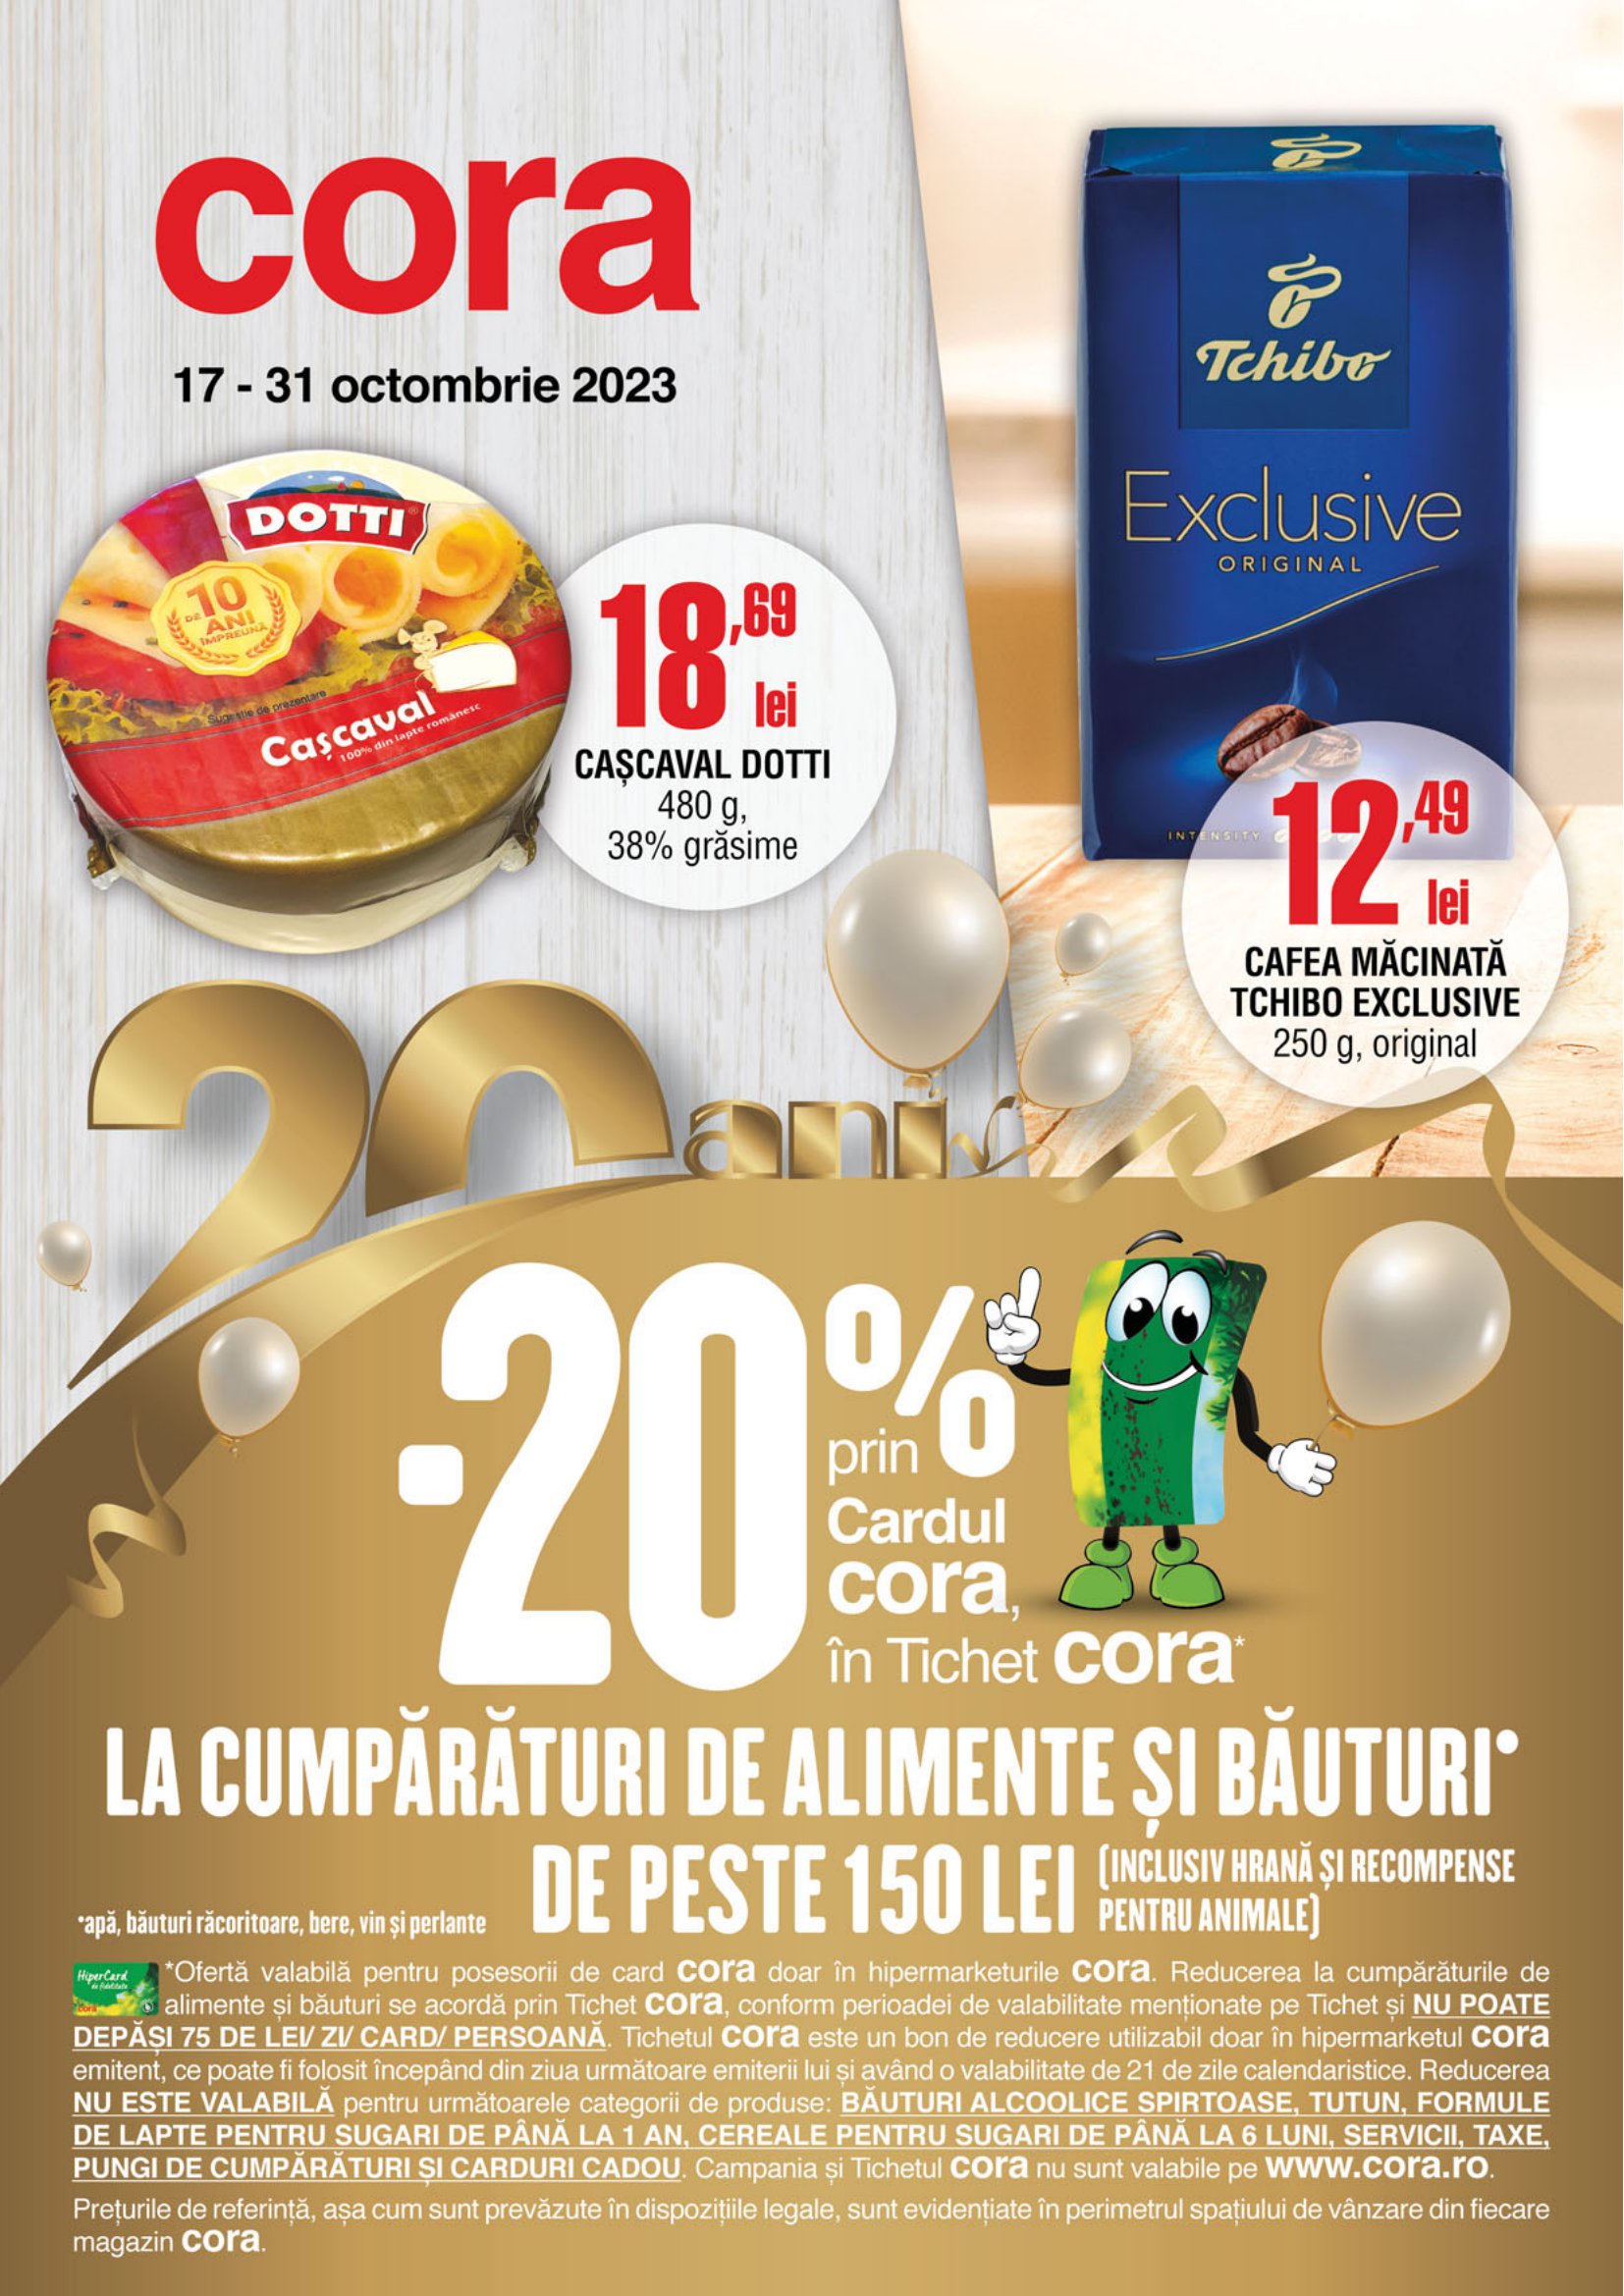 Catalog CORA 17 Octombrie 2023 - 31 Octombrie 2023 - Alimentare